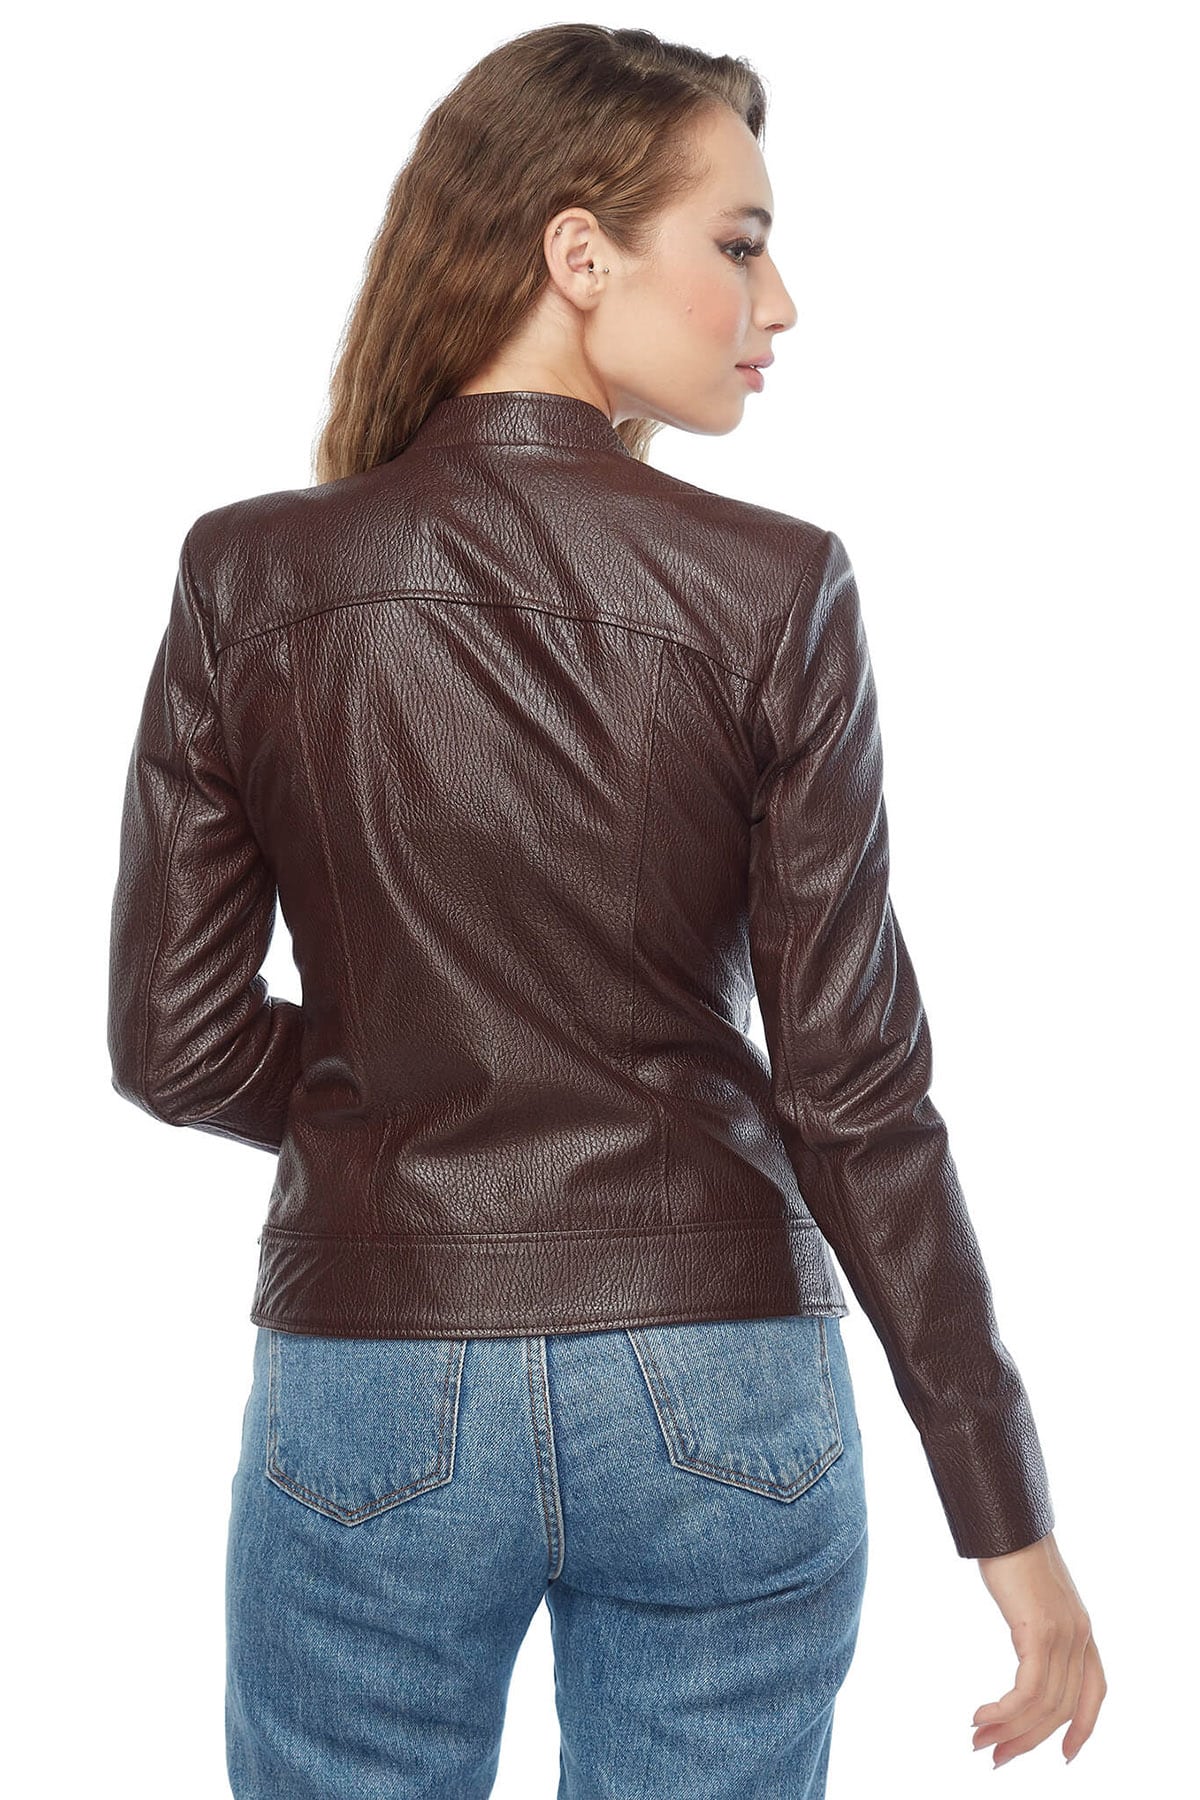 Amelia Women's 100 % Real Brown Leather Jacket